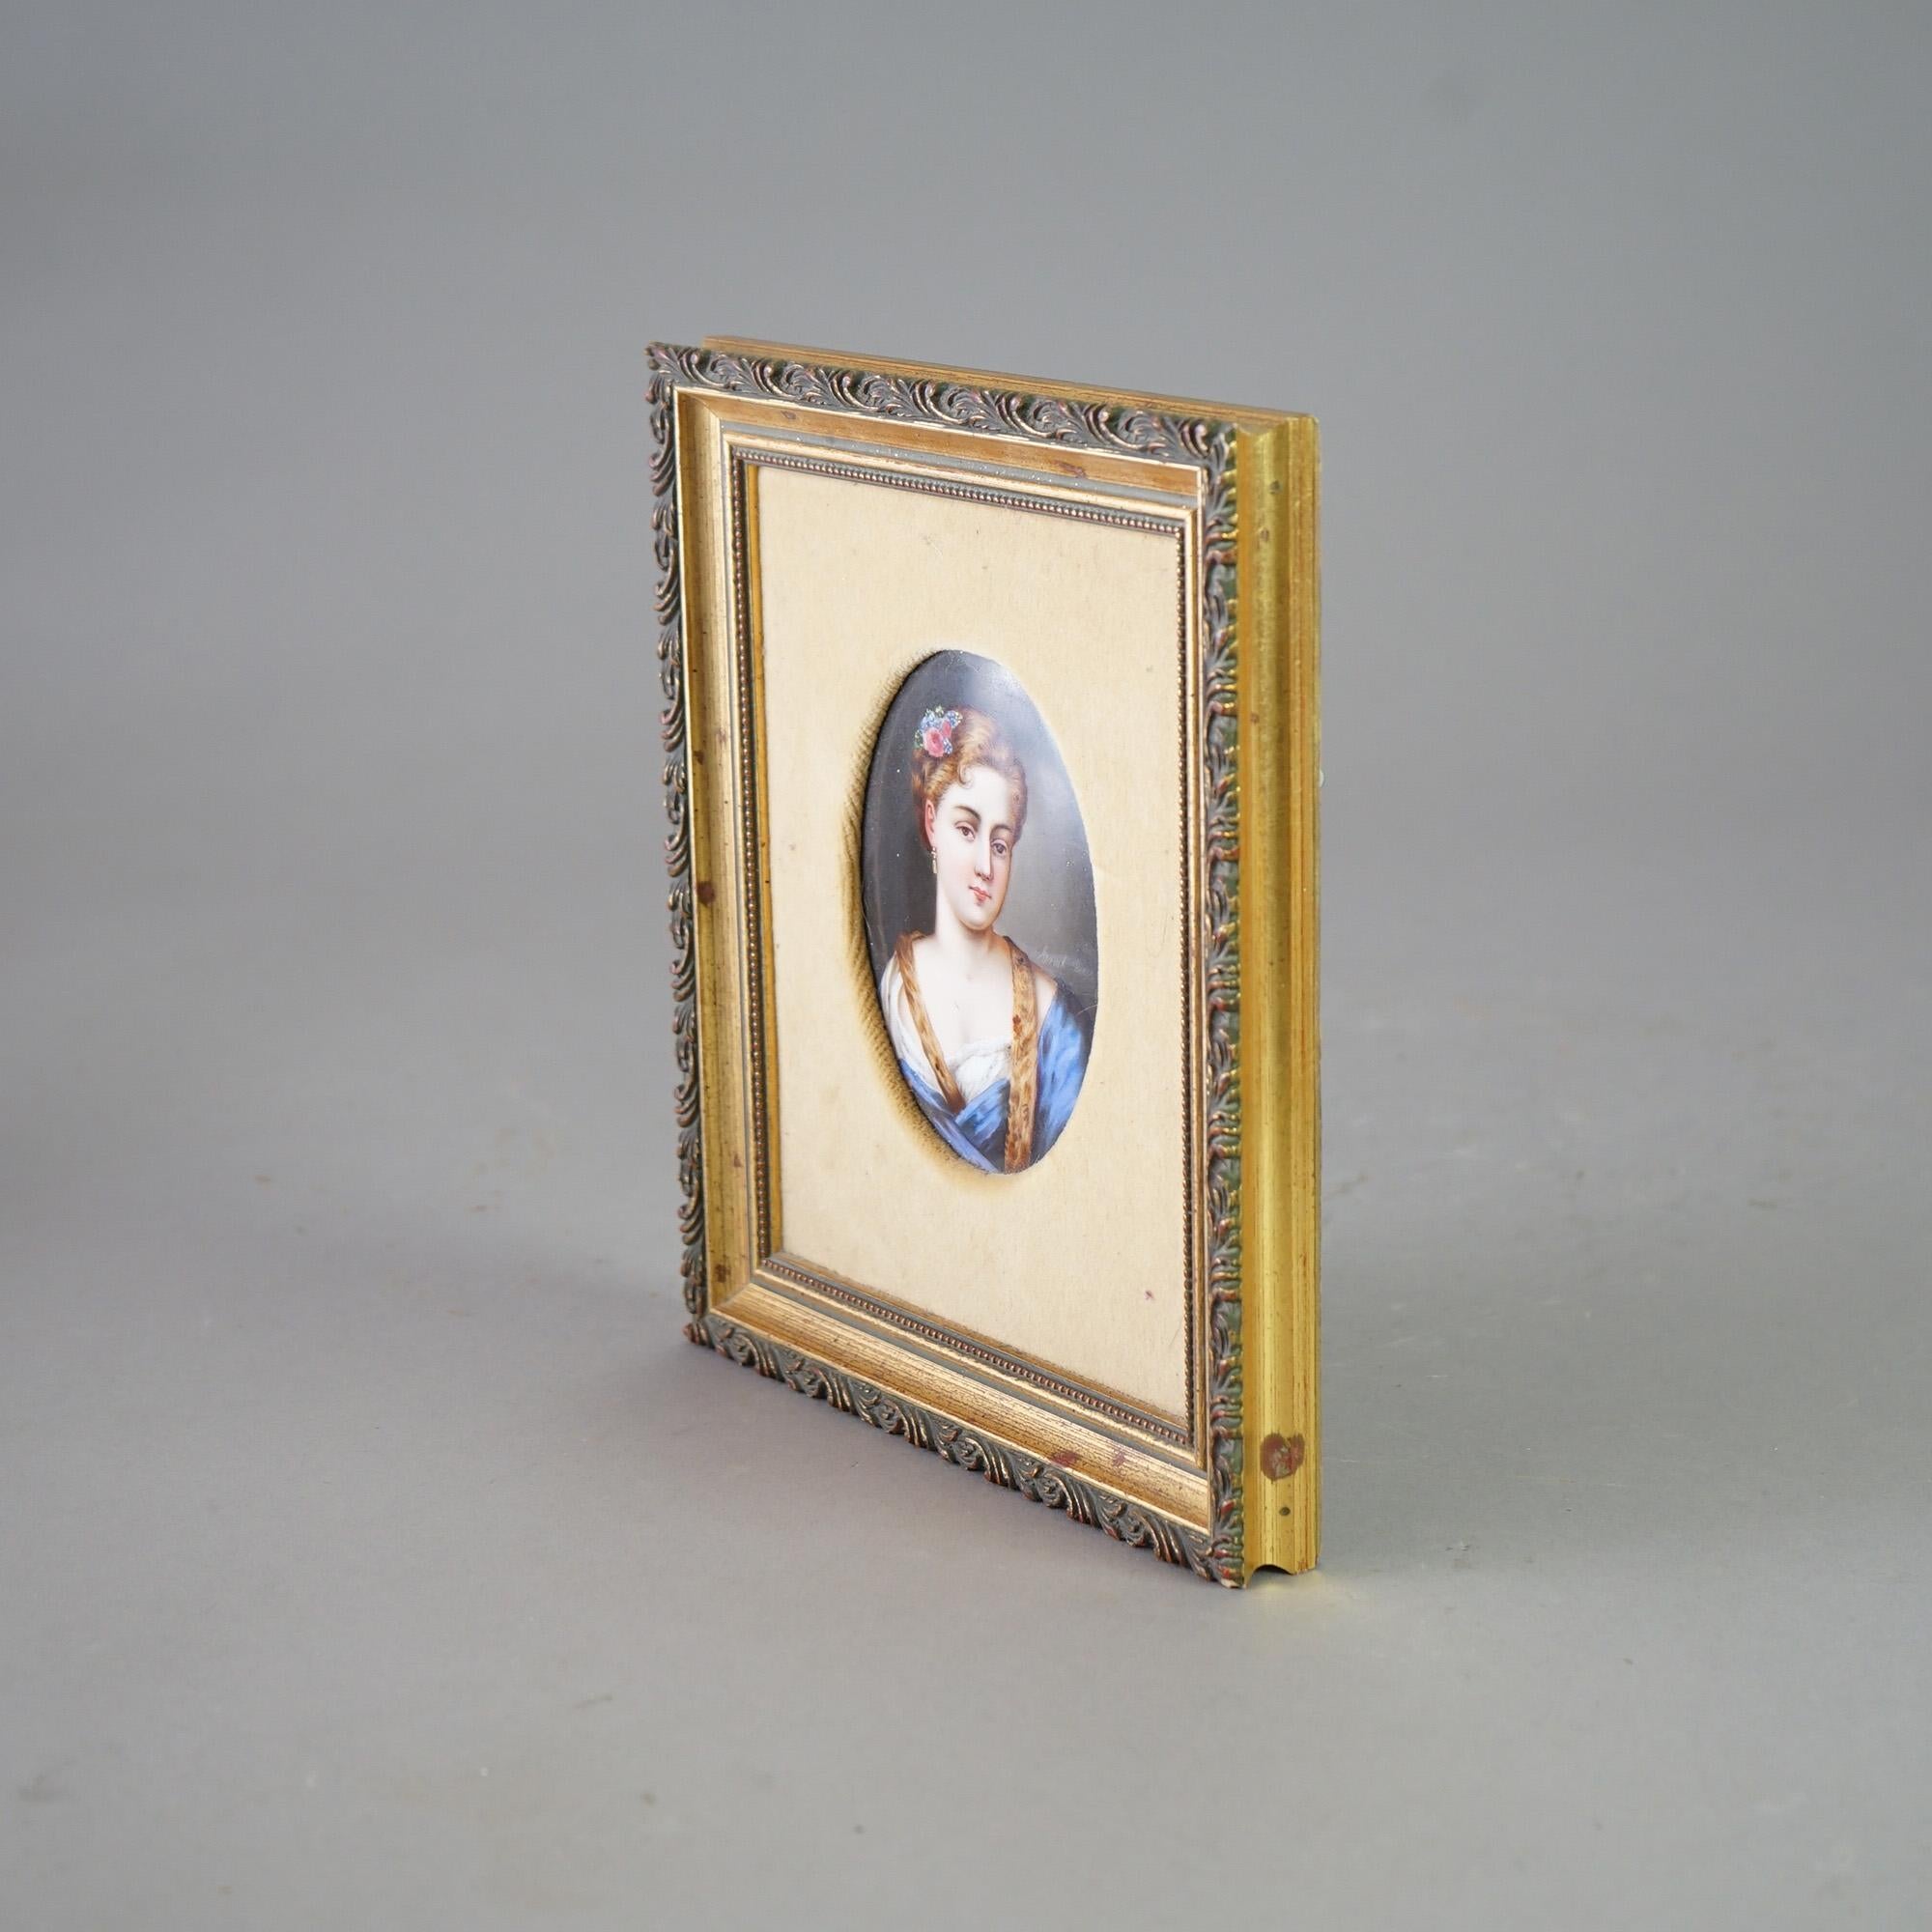 An antique plaque in the manner of KPM offers hand painted portrait of a young woman on porcelain, seated in giltwood frame, 19th century

Measures- 9.5''H x 8''W x 1.25''D